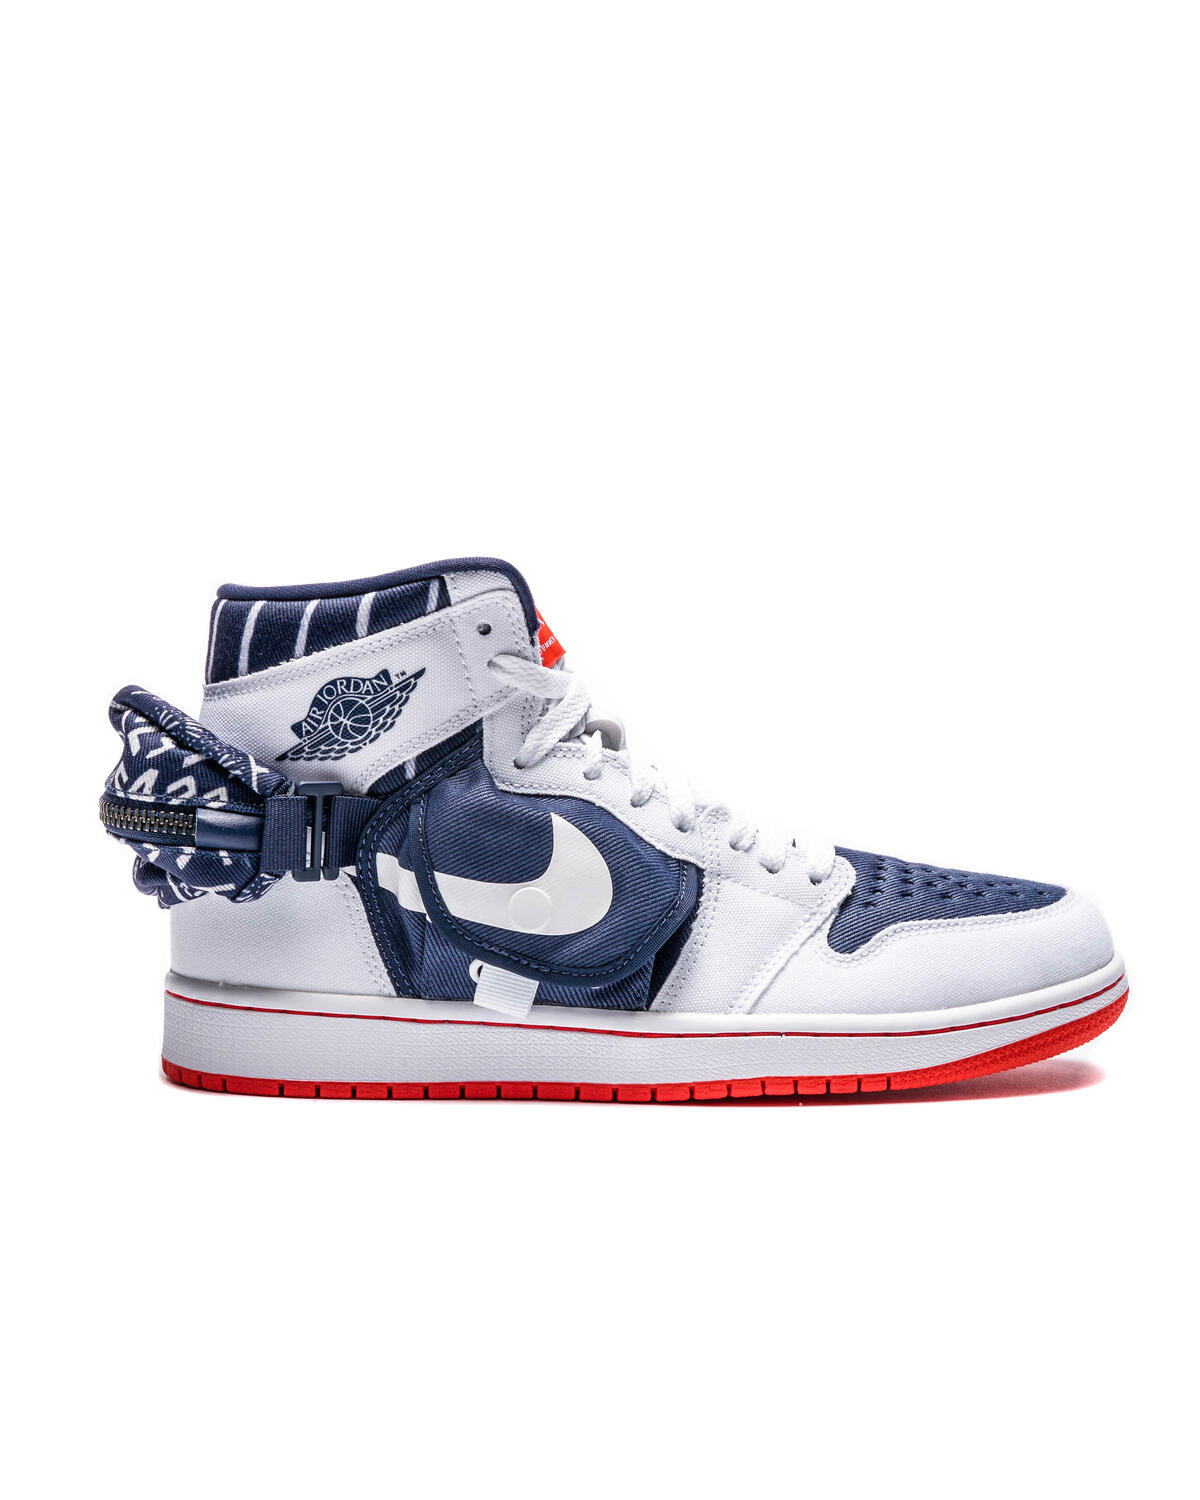 relaxed ticket Perforate Air Jordan 1 Utility Q54 | DV1717-100 | AFEW STORE